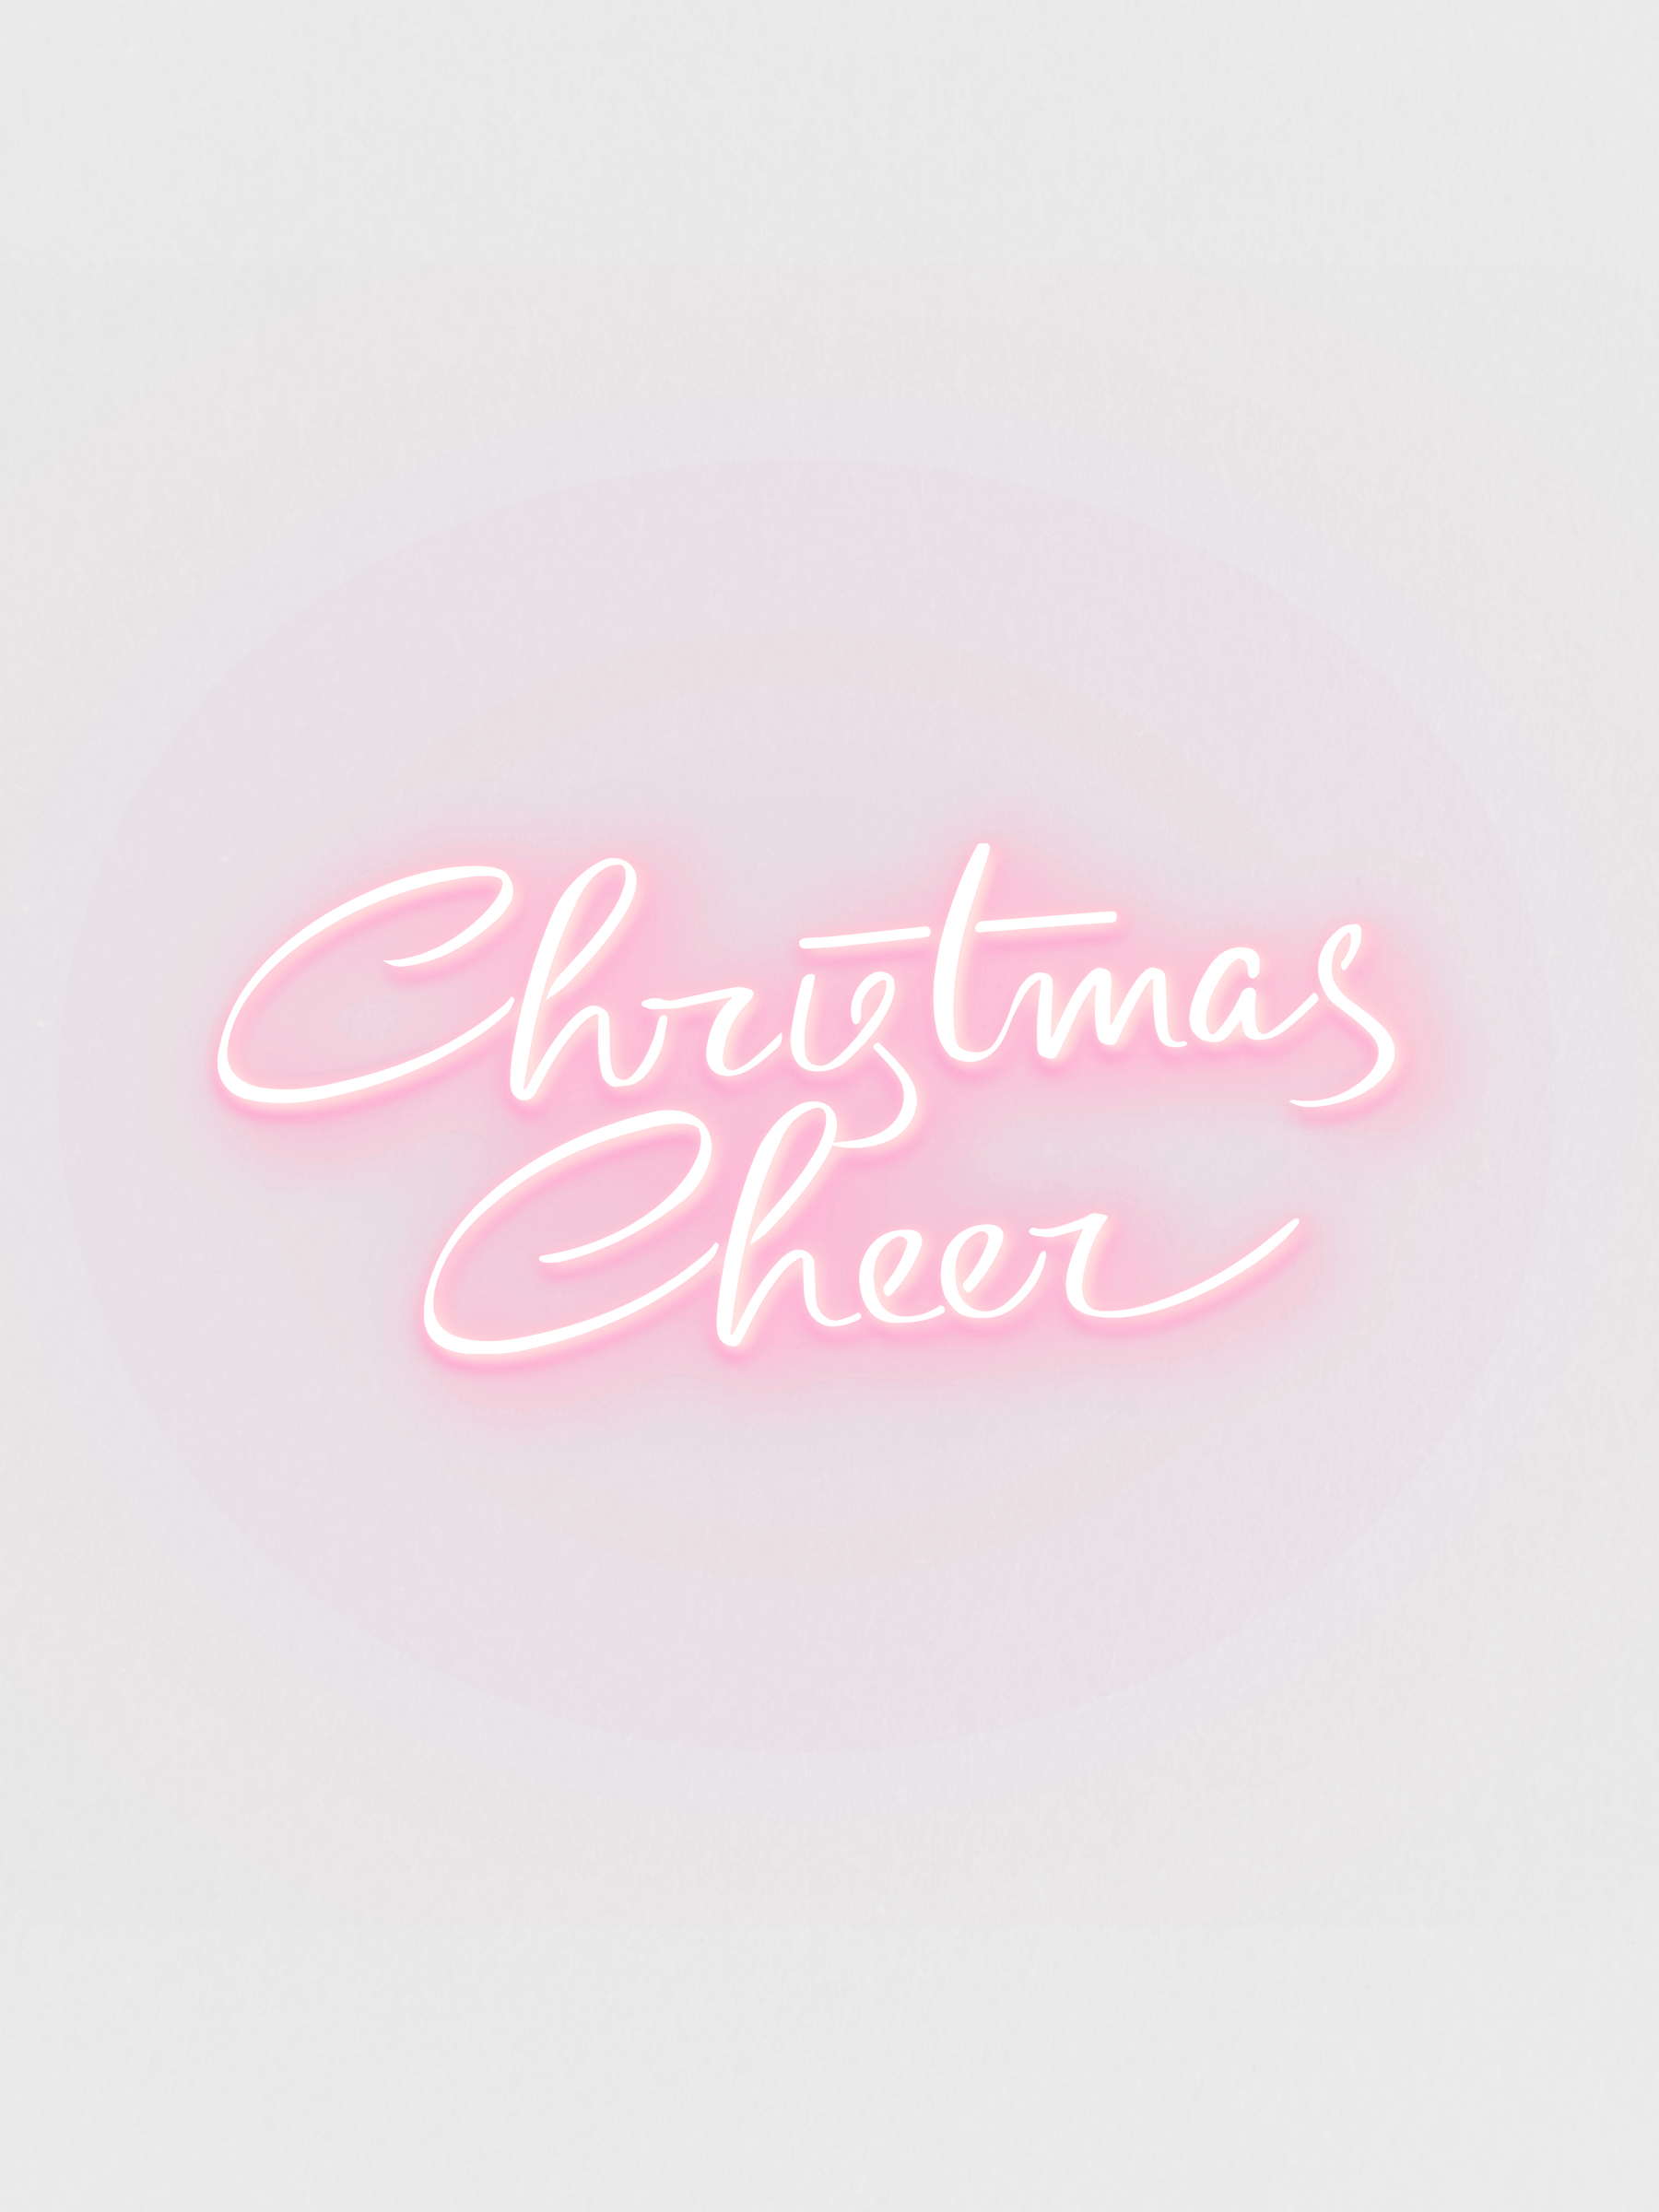 A New Era Begins Back With You Shortly Christmas Wallpaper